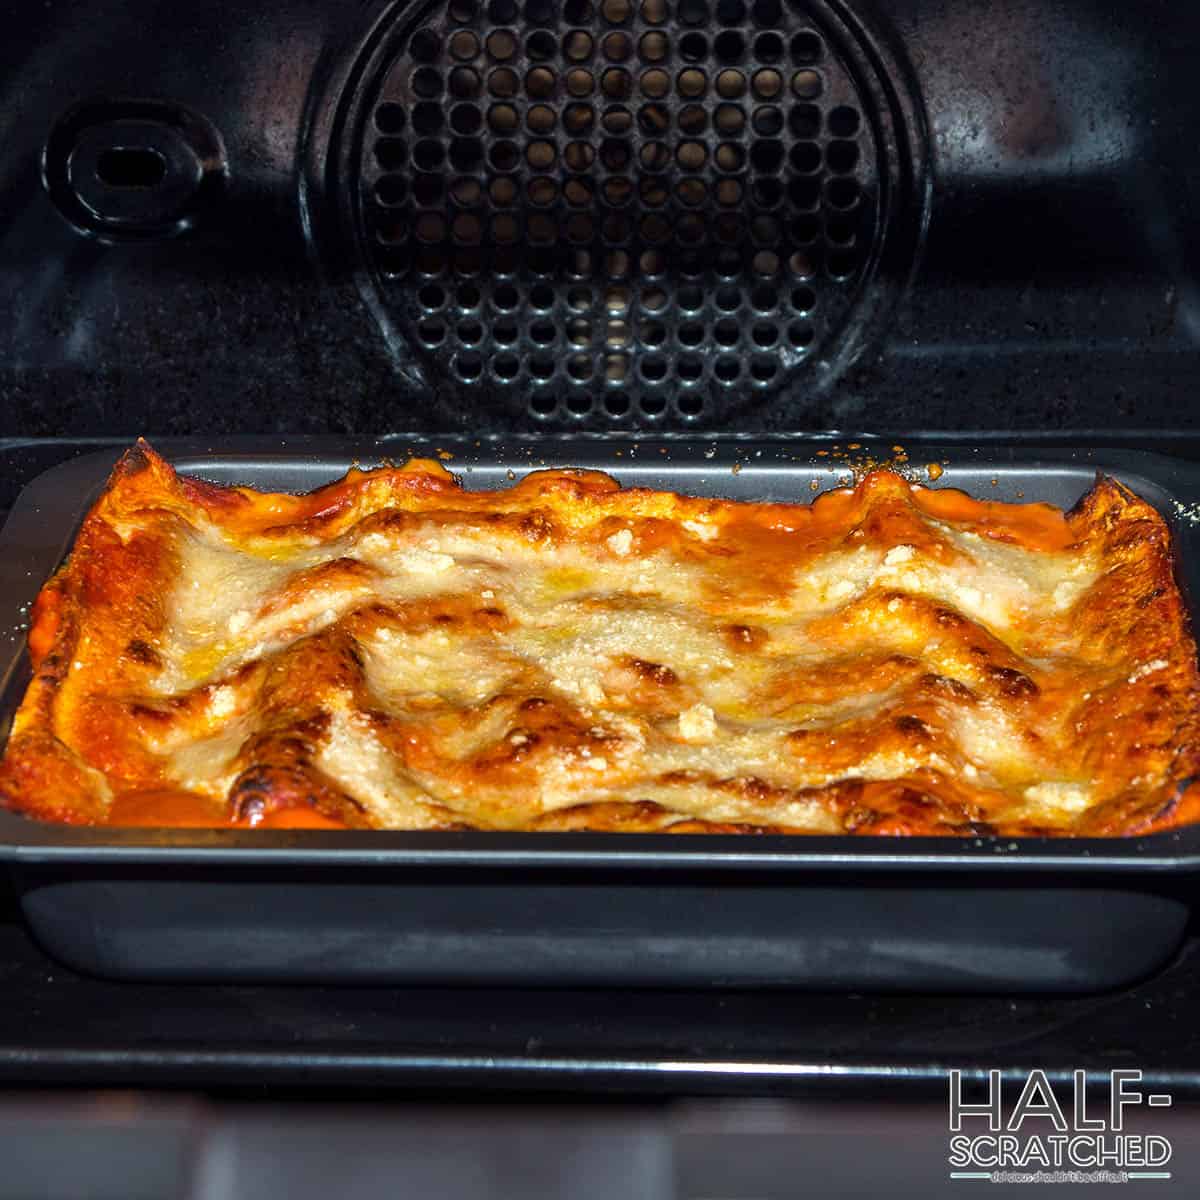 Reheating lasagna in the oven